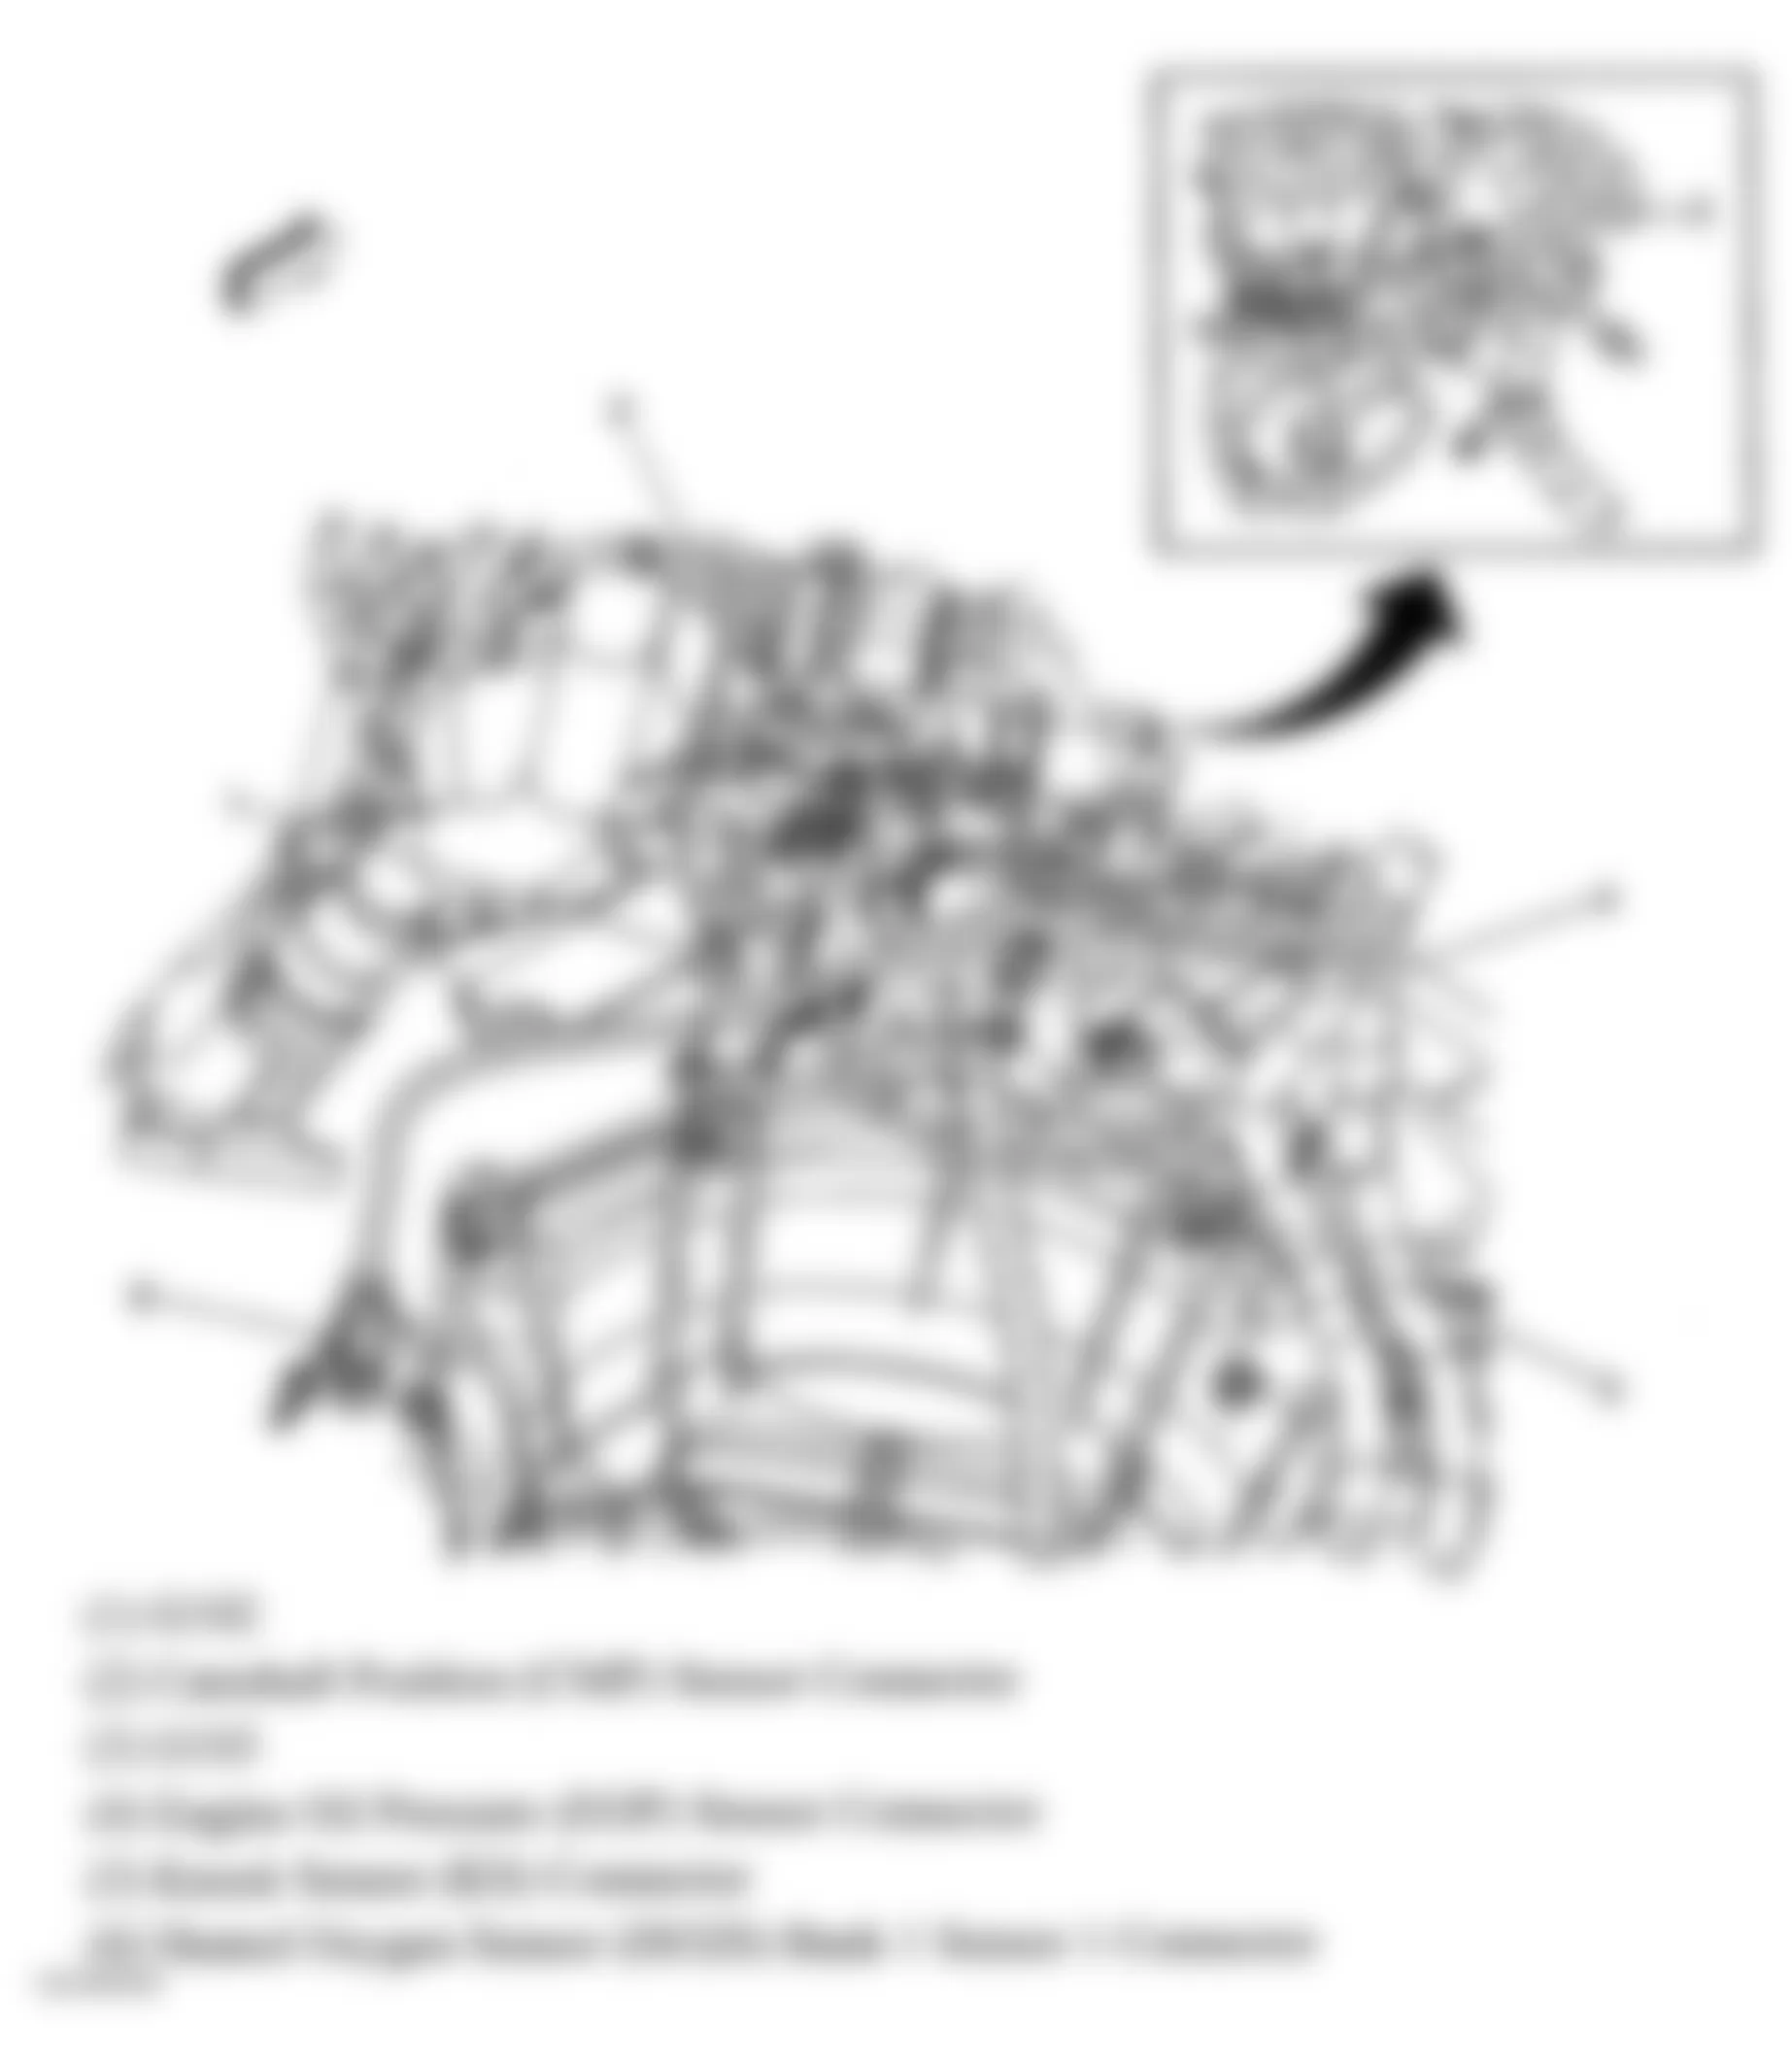 GMC Savana Special G3500 2004 - Component Locations -  Rear Of Engine (4.3L VIN X)